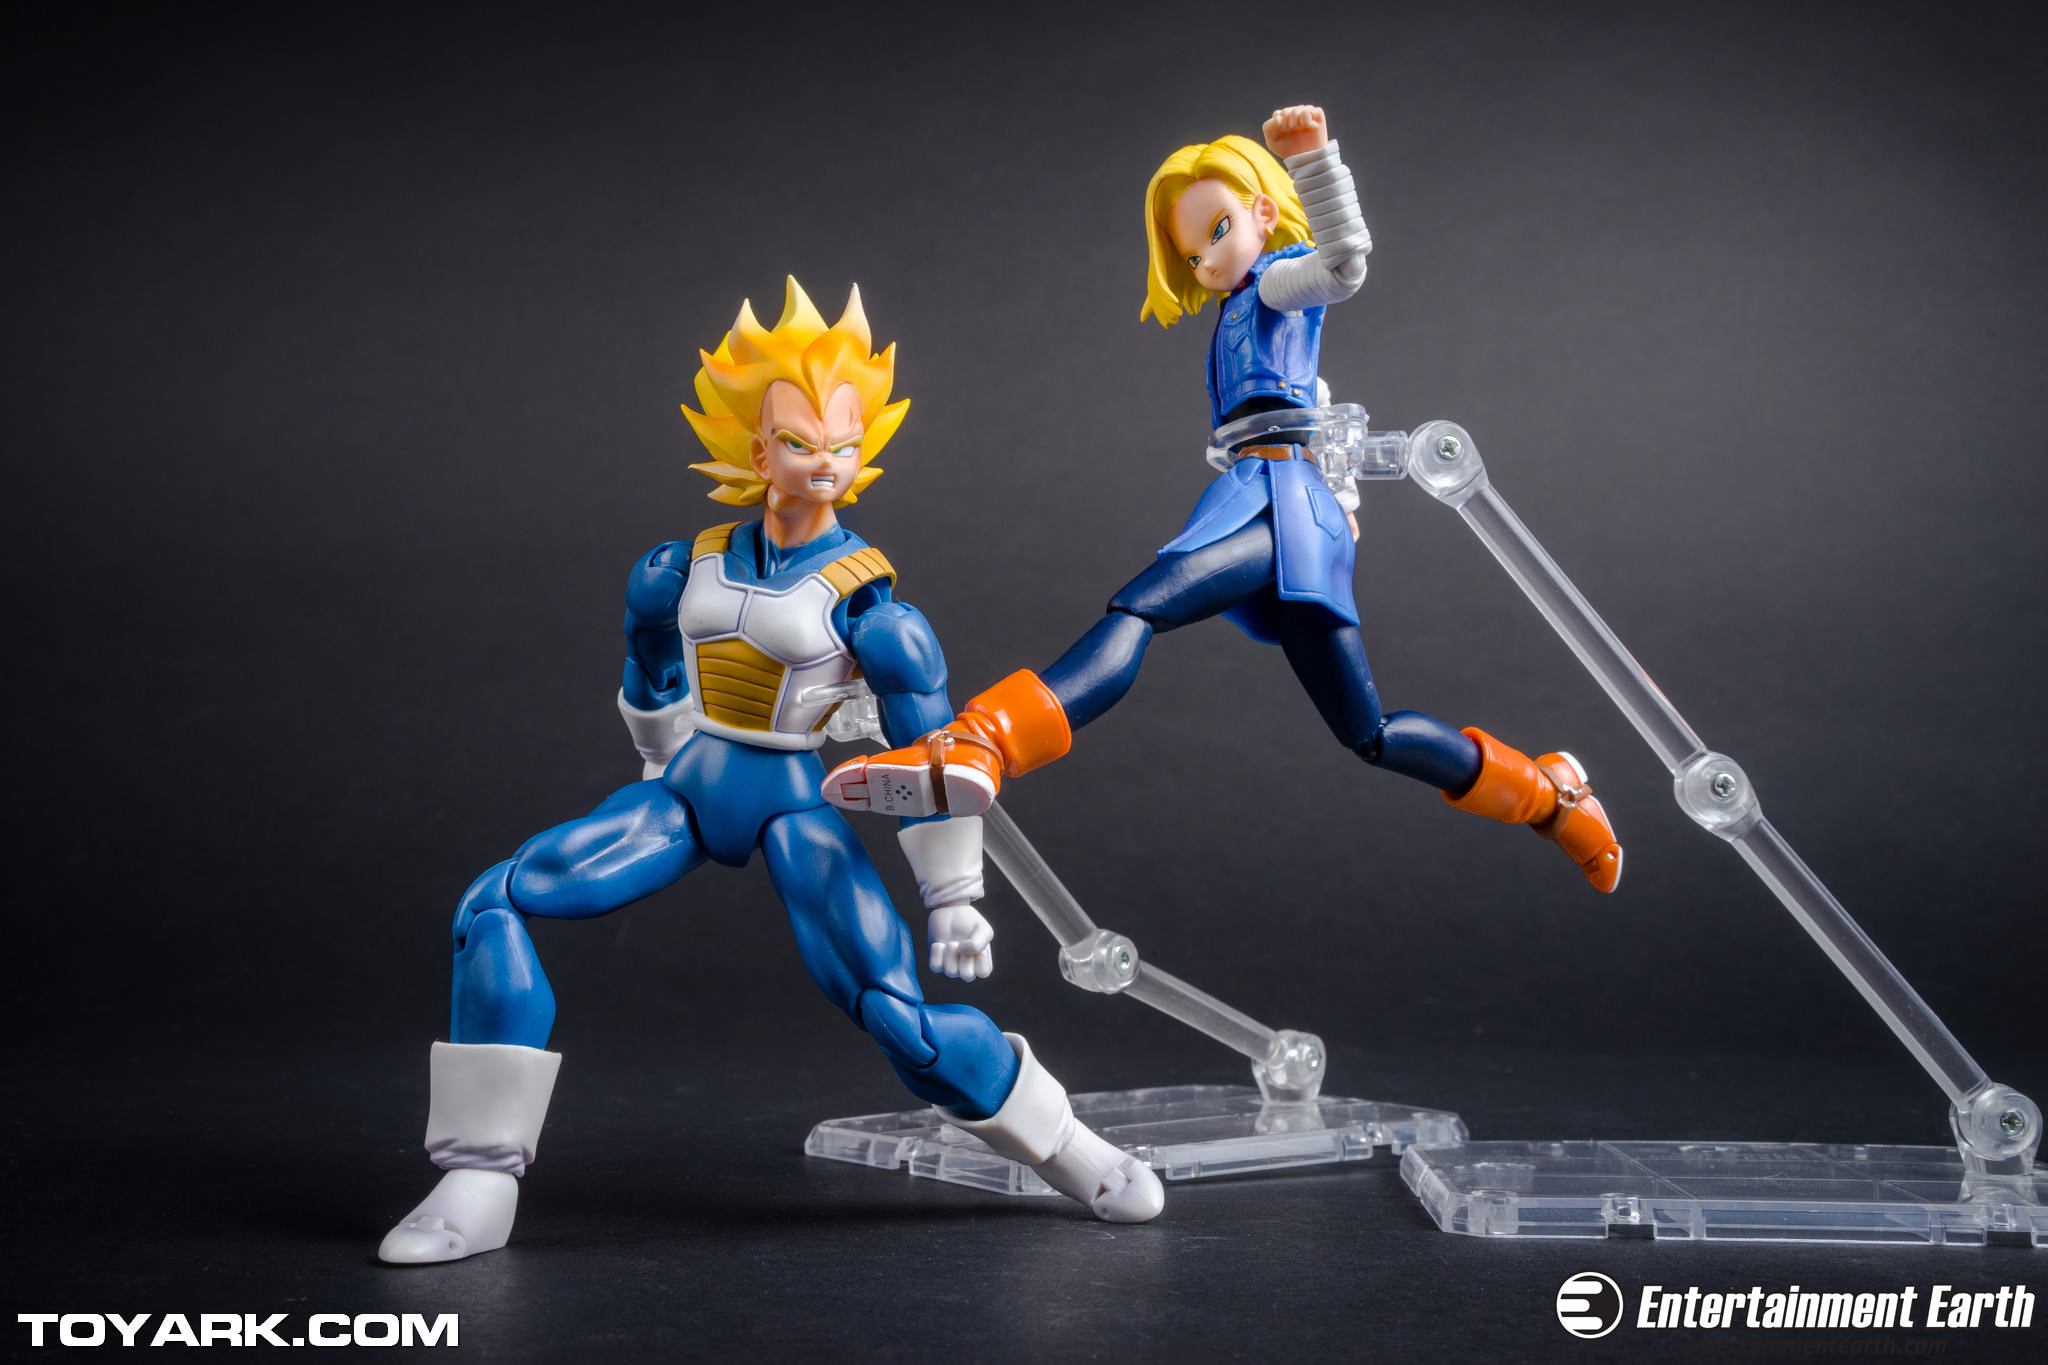 Figuarts-Android-18-23.jpg